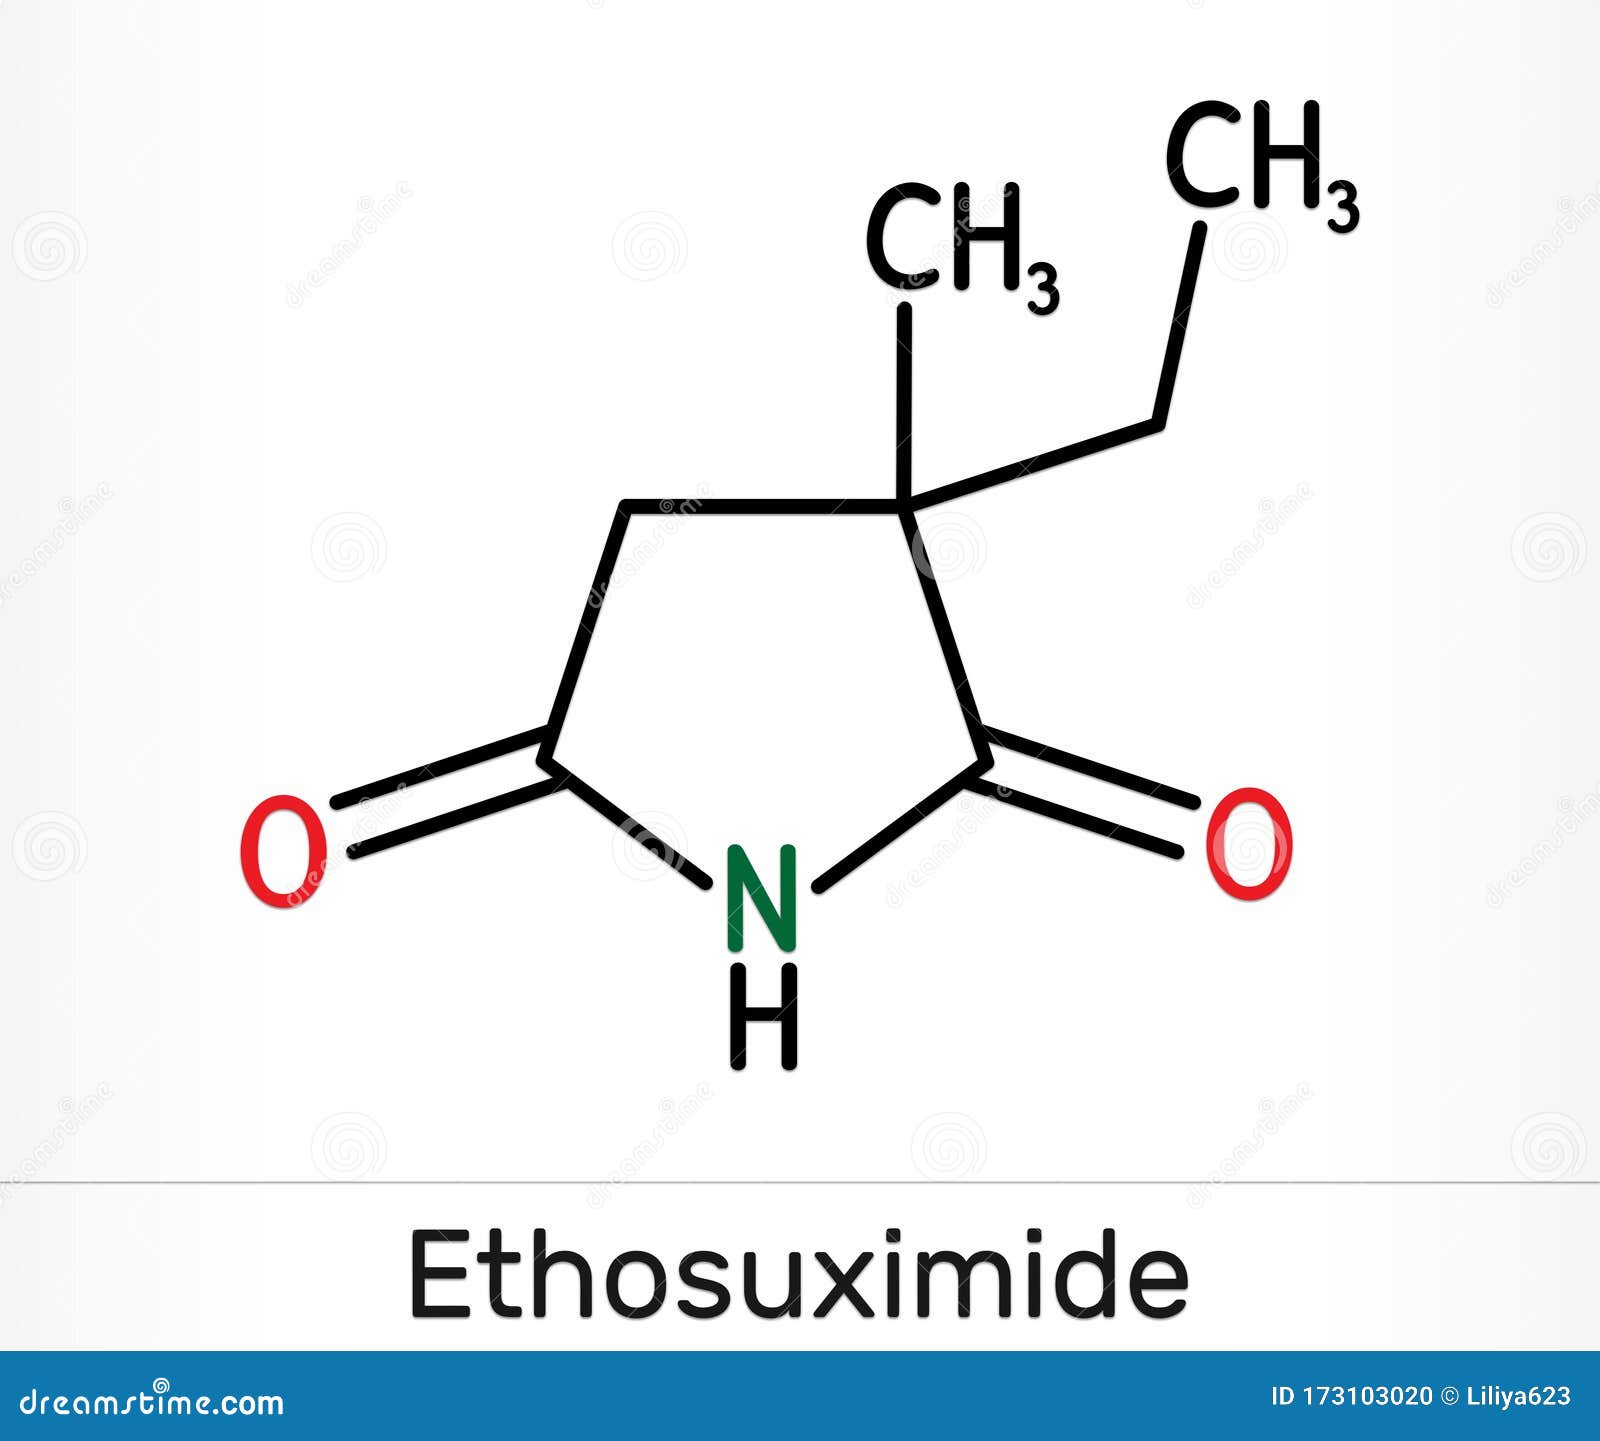 ethosuximide, c7h11no2 molecule. it is succinimide based anticonvulsant, useful in the treatment of absence seizures. skeletal